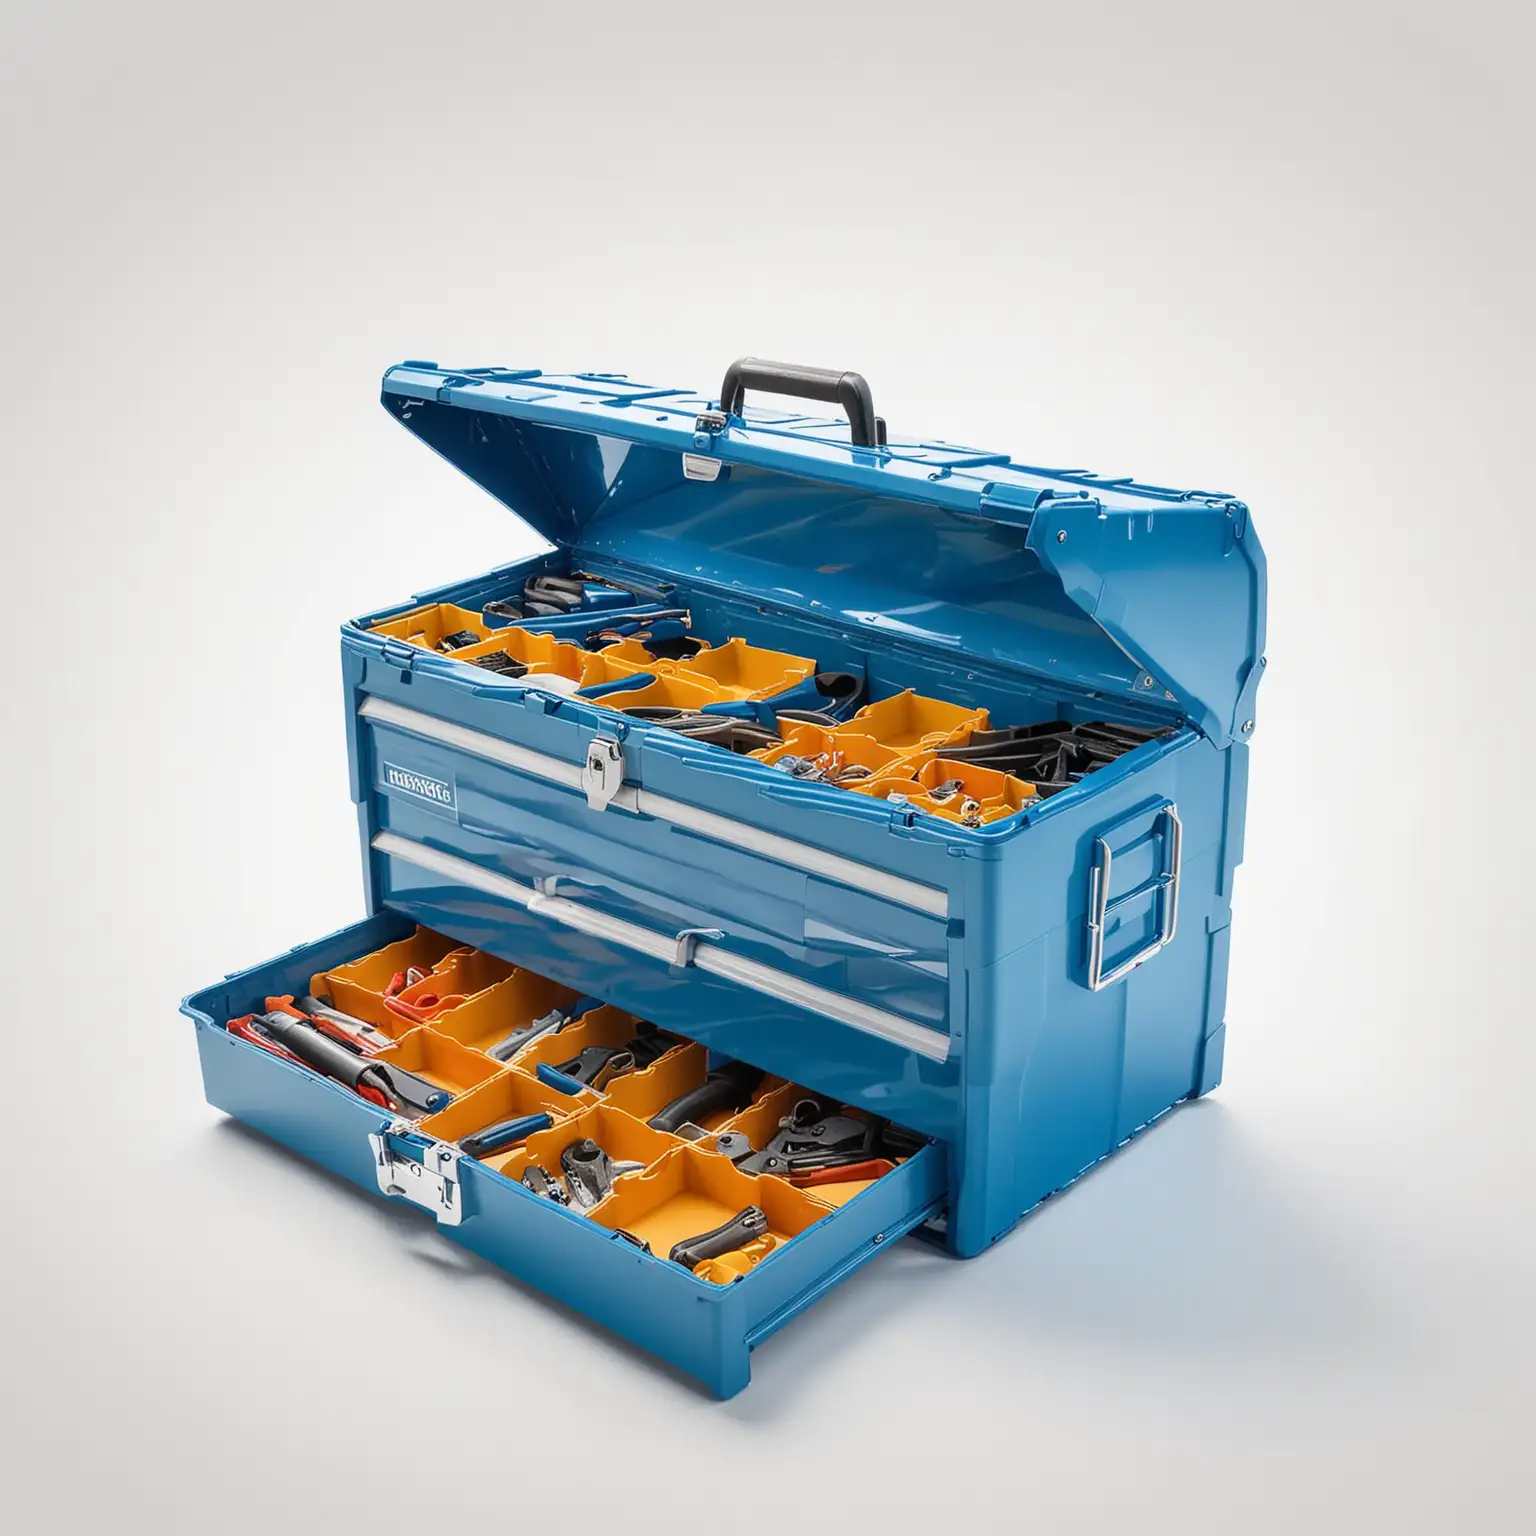 Blue Toolbox on White Background